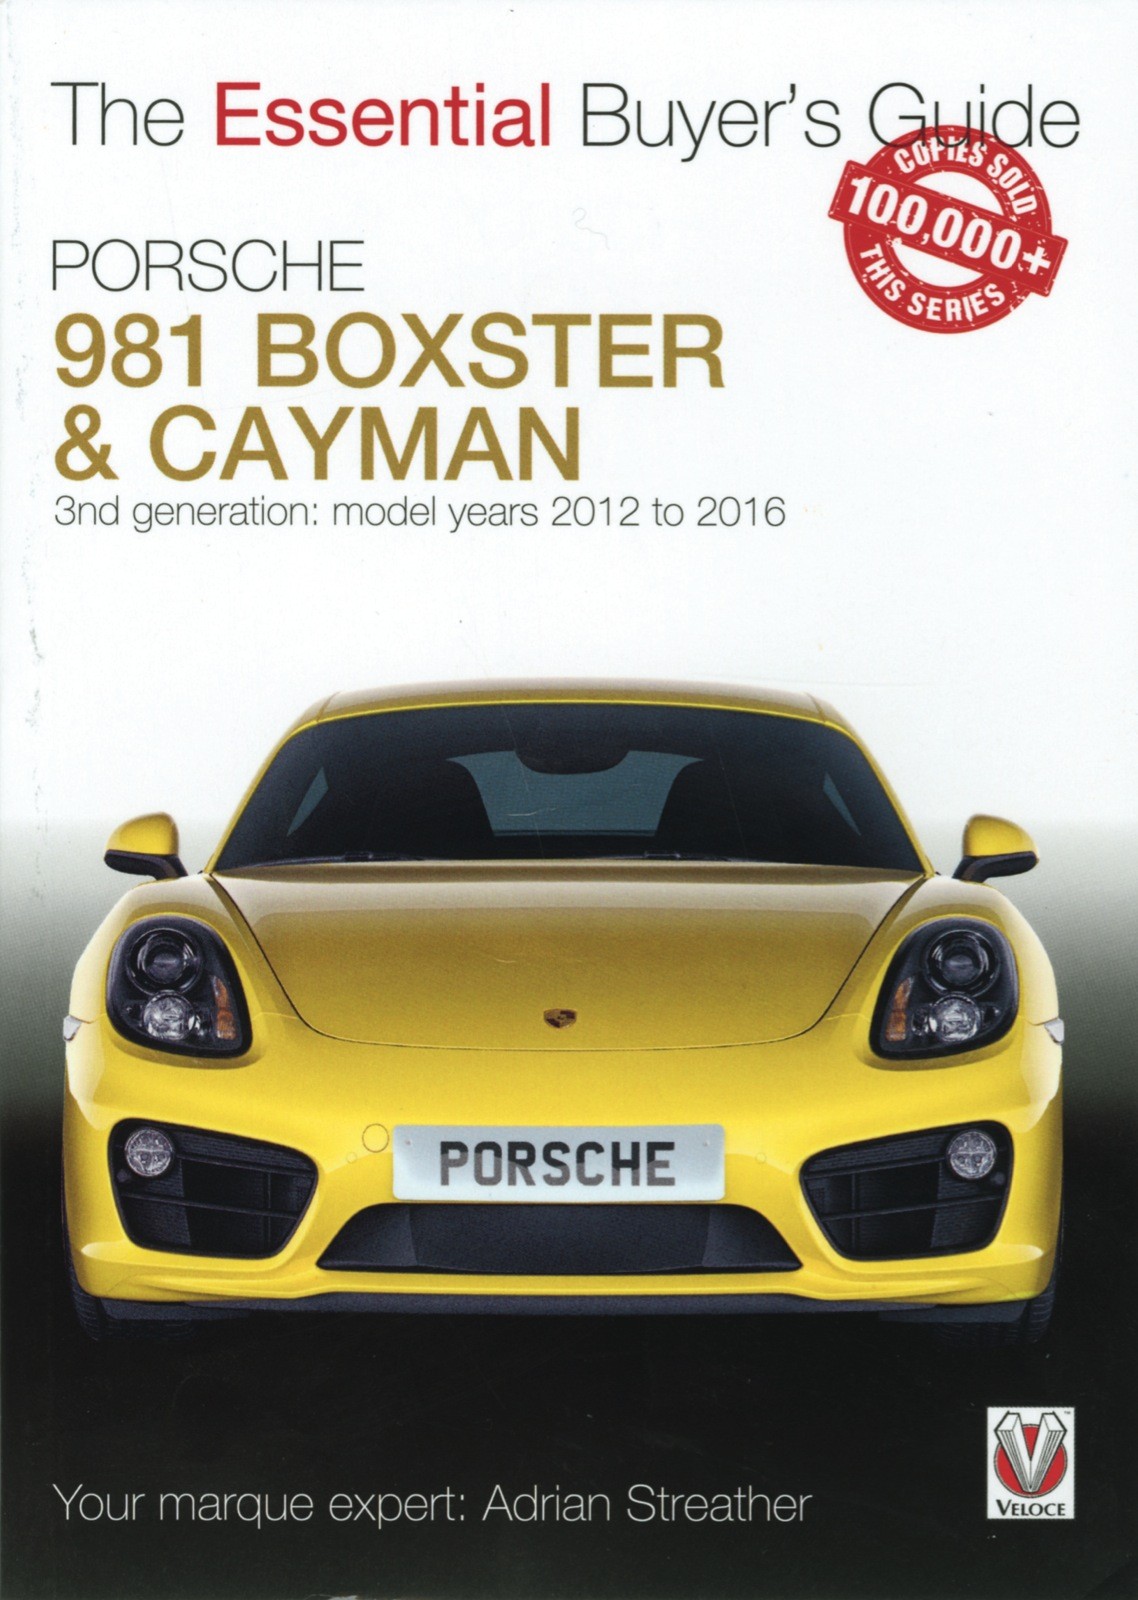 The essential buyer's guide Porsche 981 Boxster & Cayman